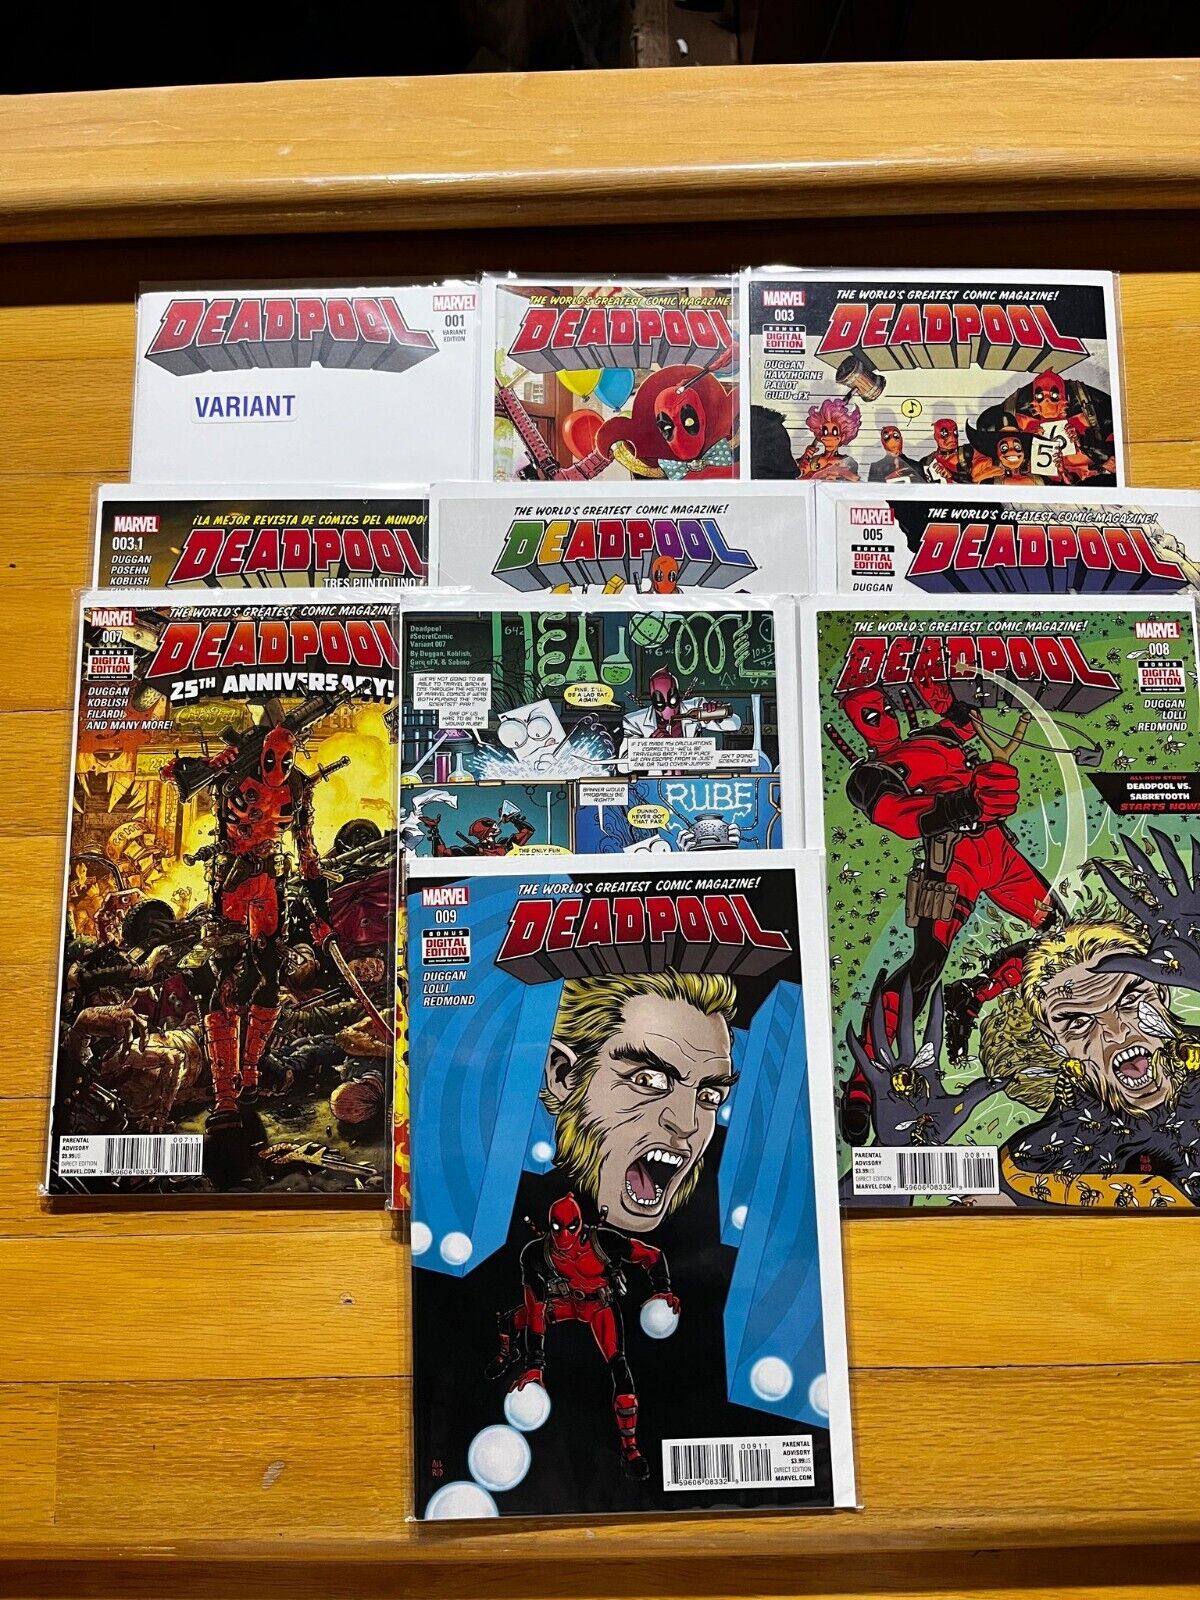 Deadpool Vol 6 Lot Issues #1-5 Two variant covers #7 and #8-9